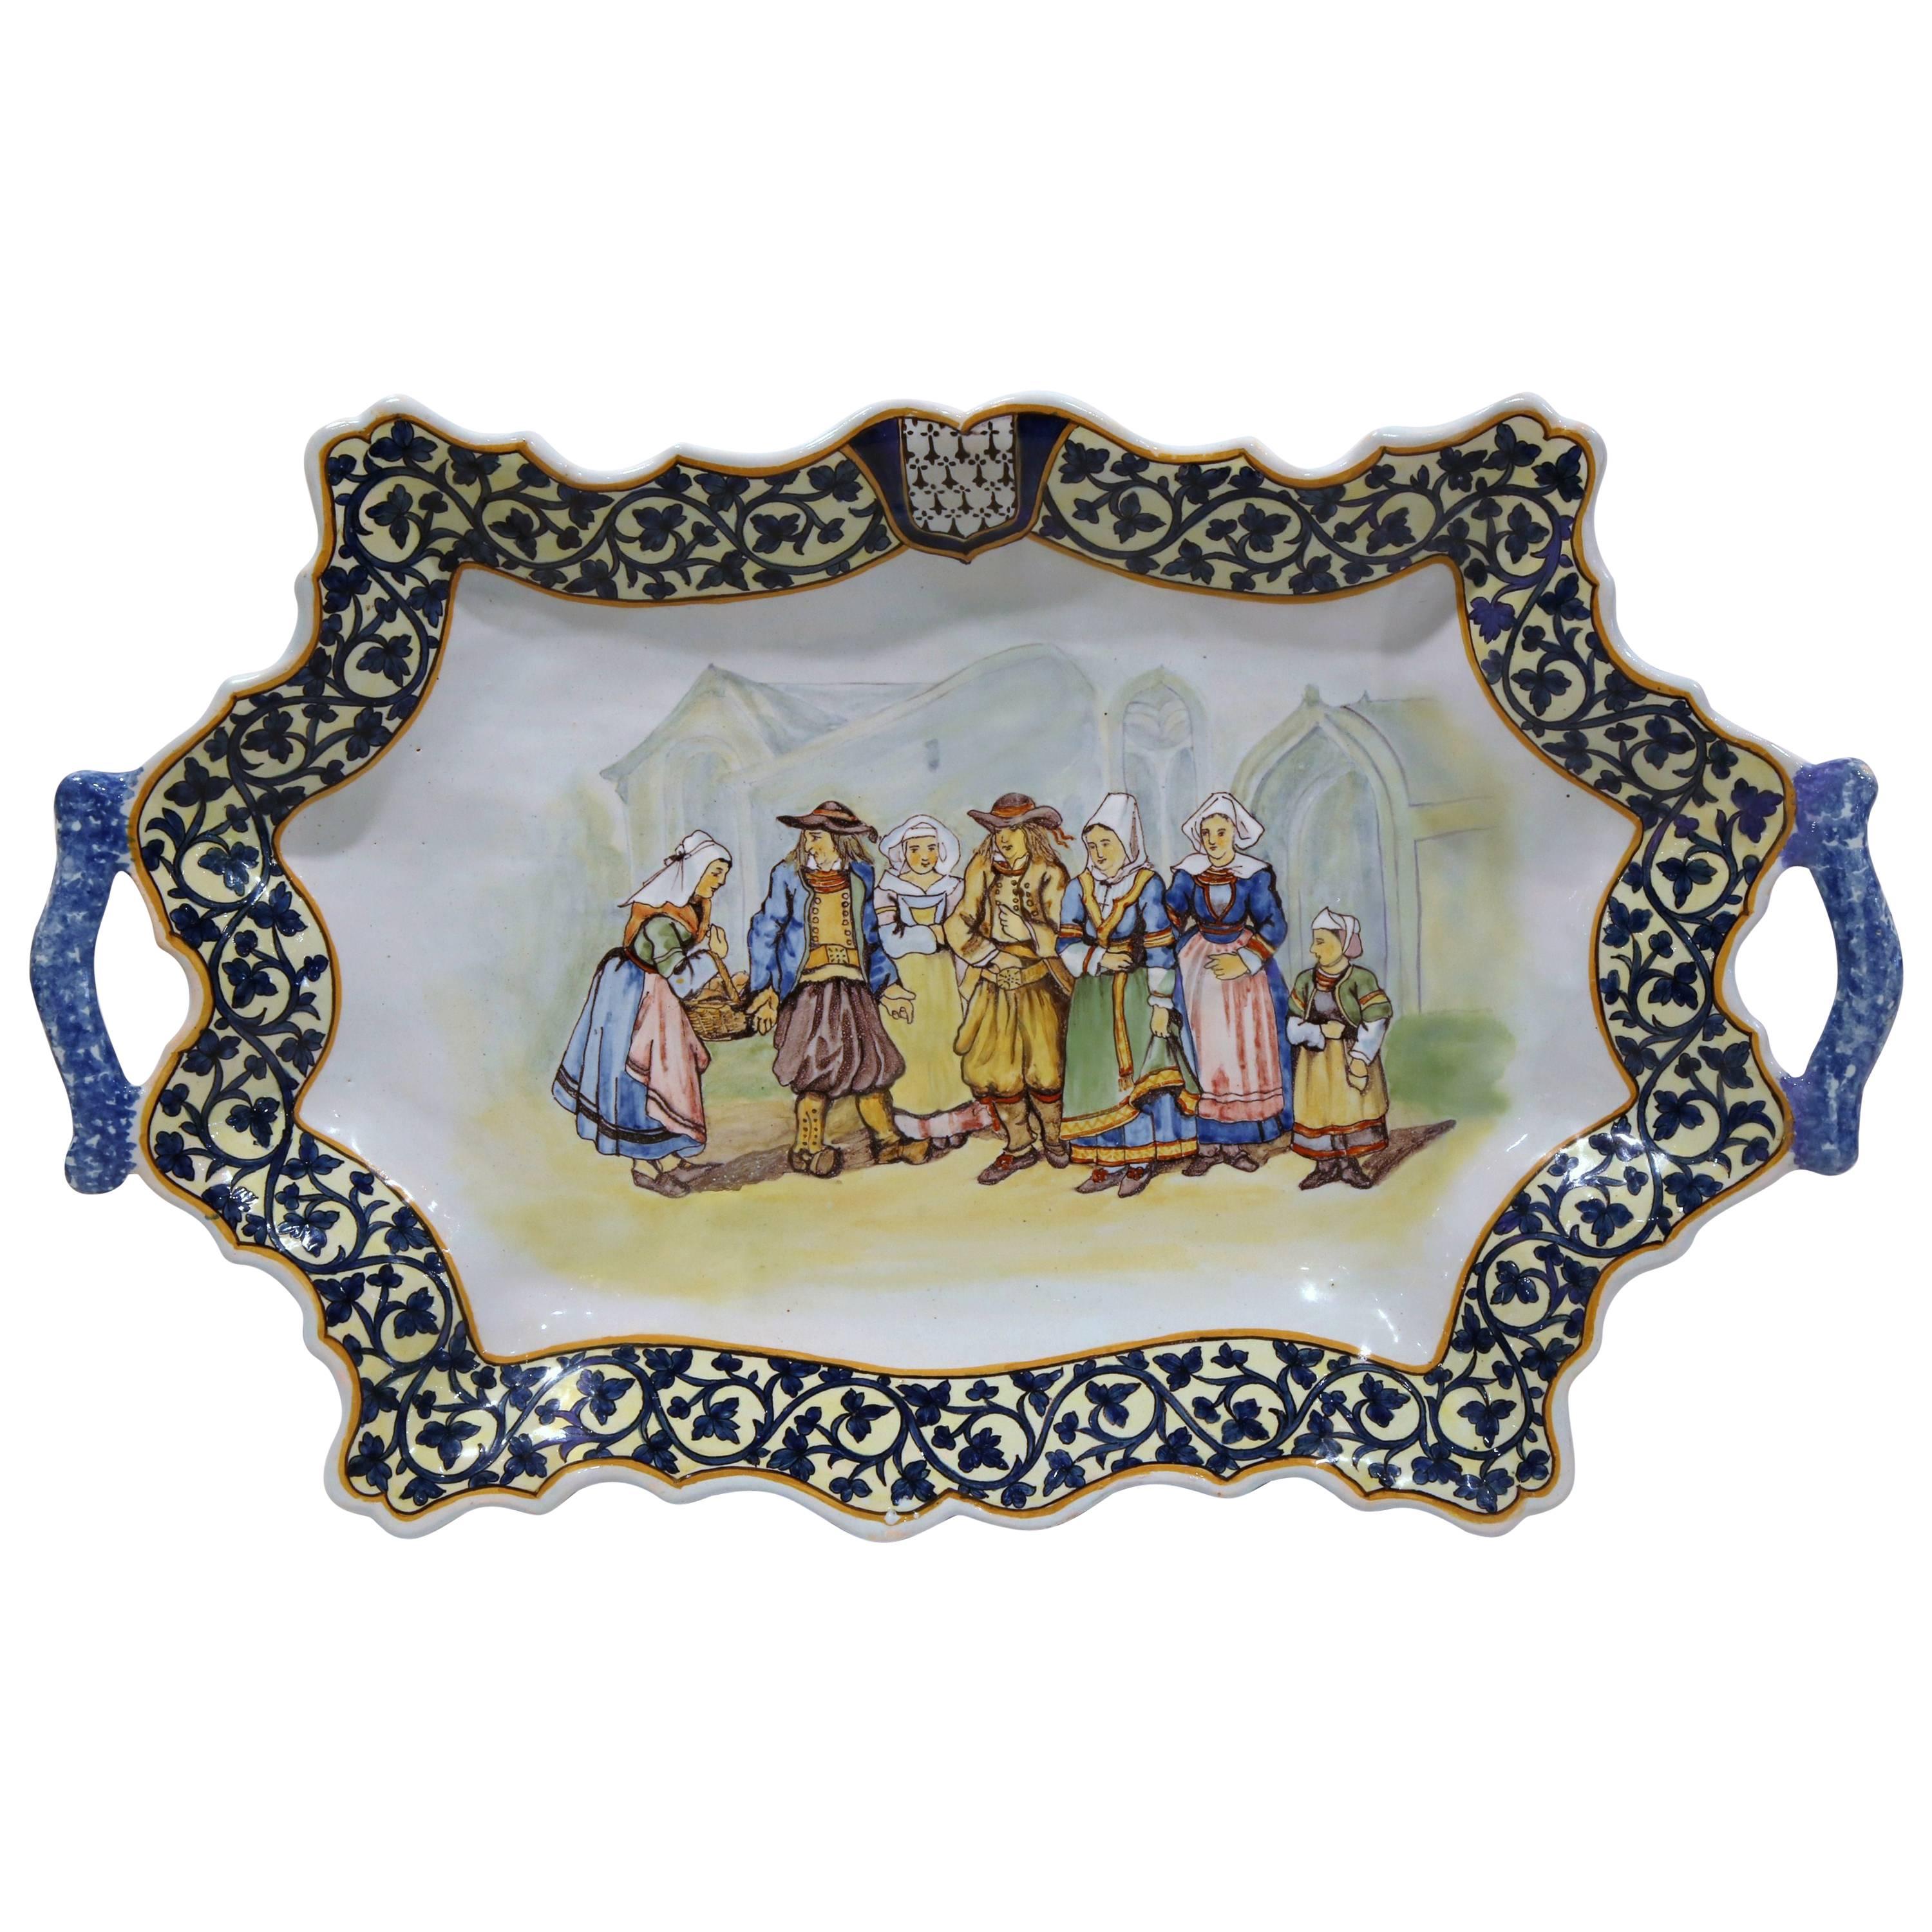 19th Century French Porquier-Beau Quimper Hand-Painted Platter with Handles